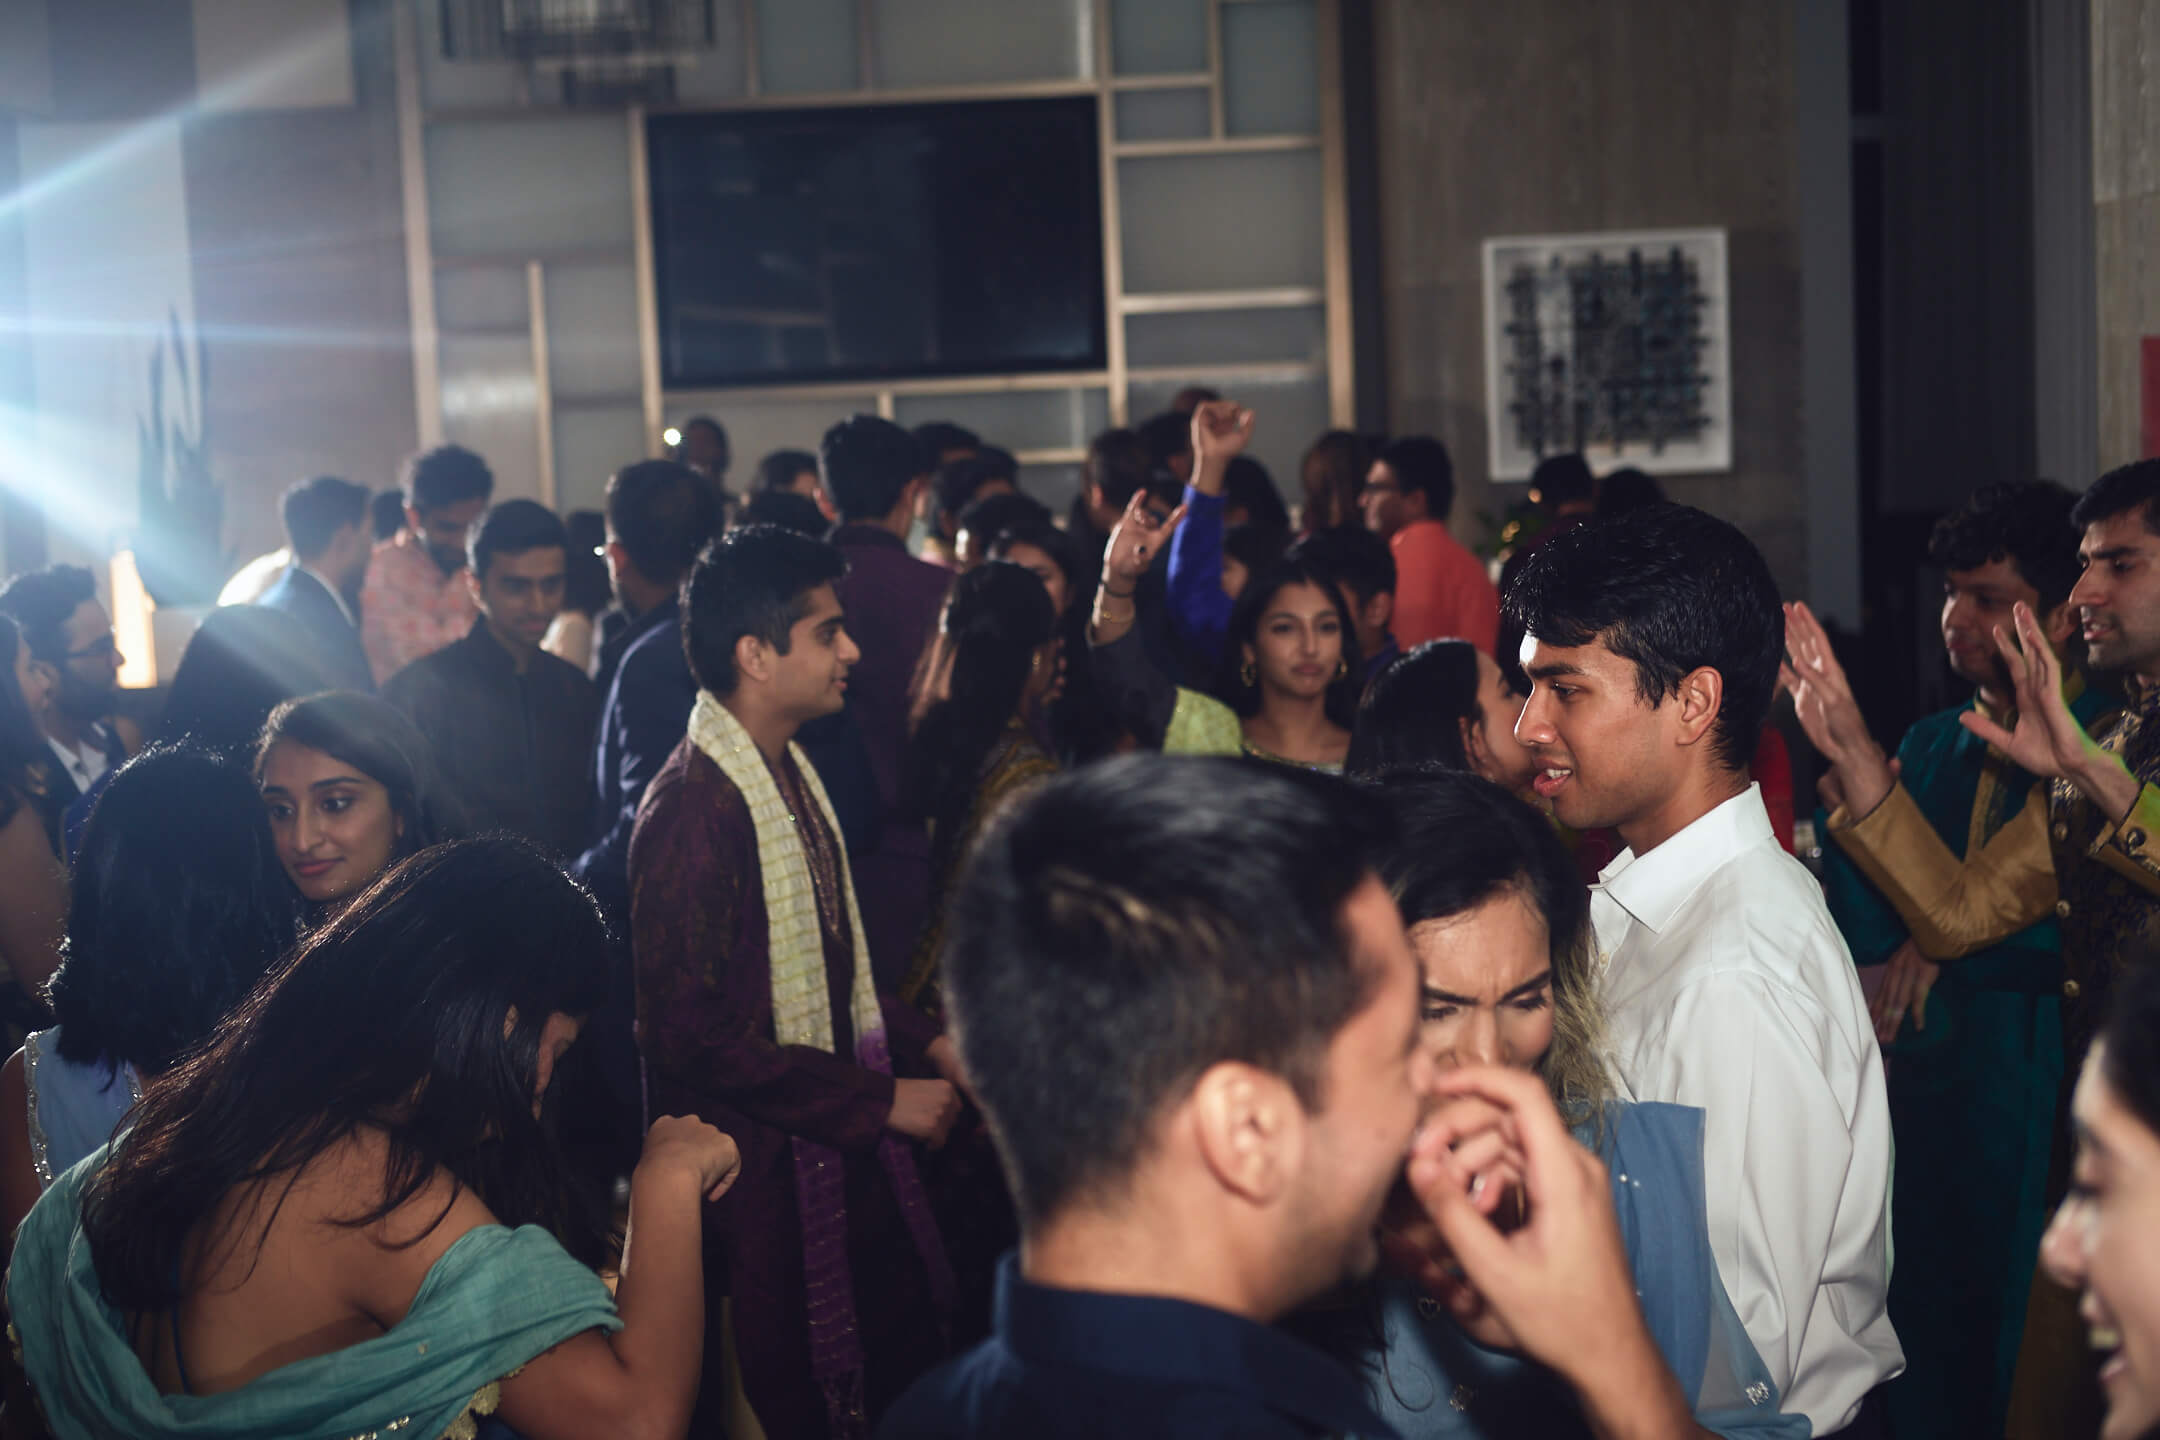 Sehal & Pranay - Diwali Celebration - Event Photography - Lifestyle Photography - Downtown Brooklyn, New York 